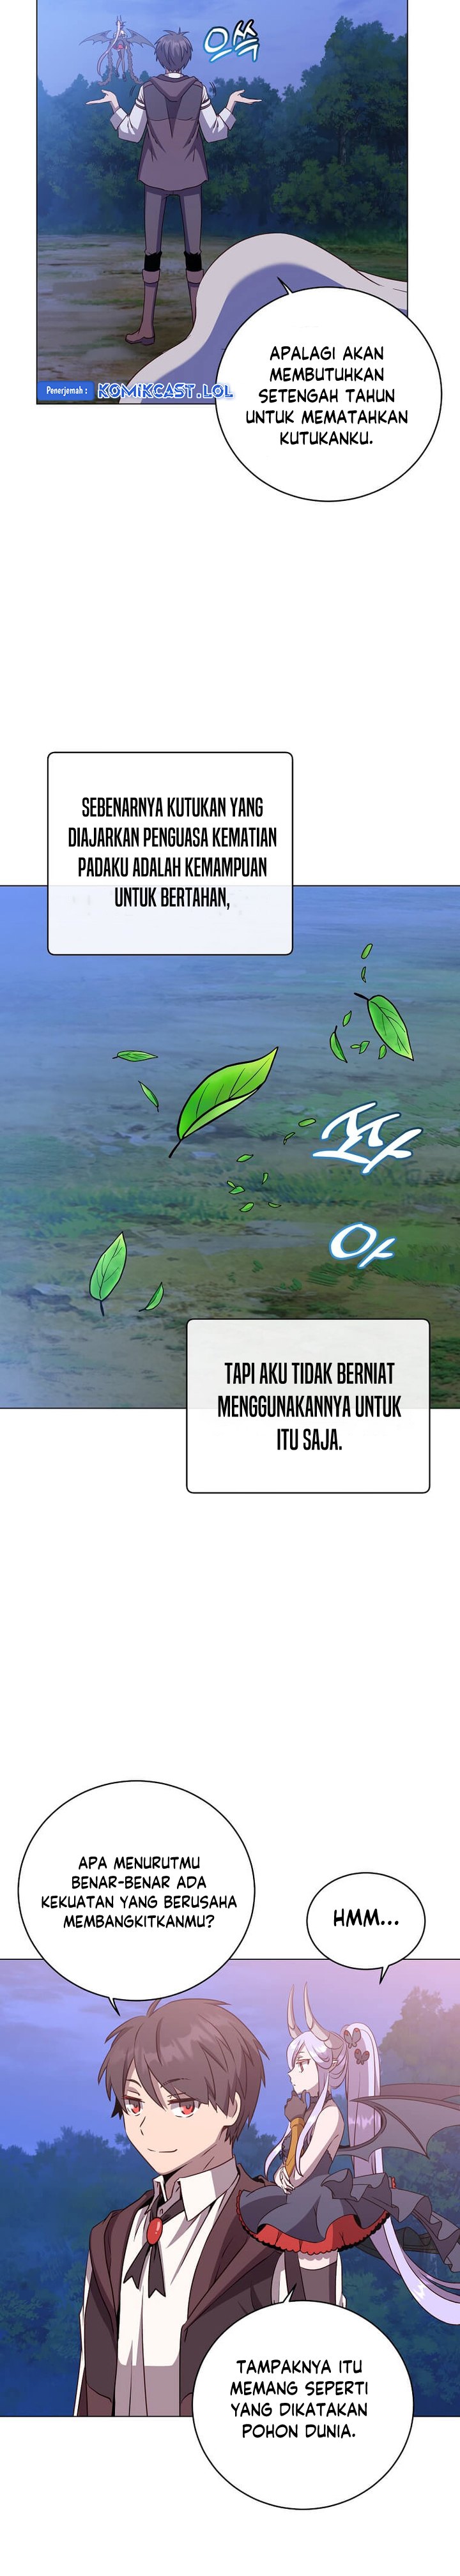 The Max Level Hero Has Returned! Chapter 150